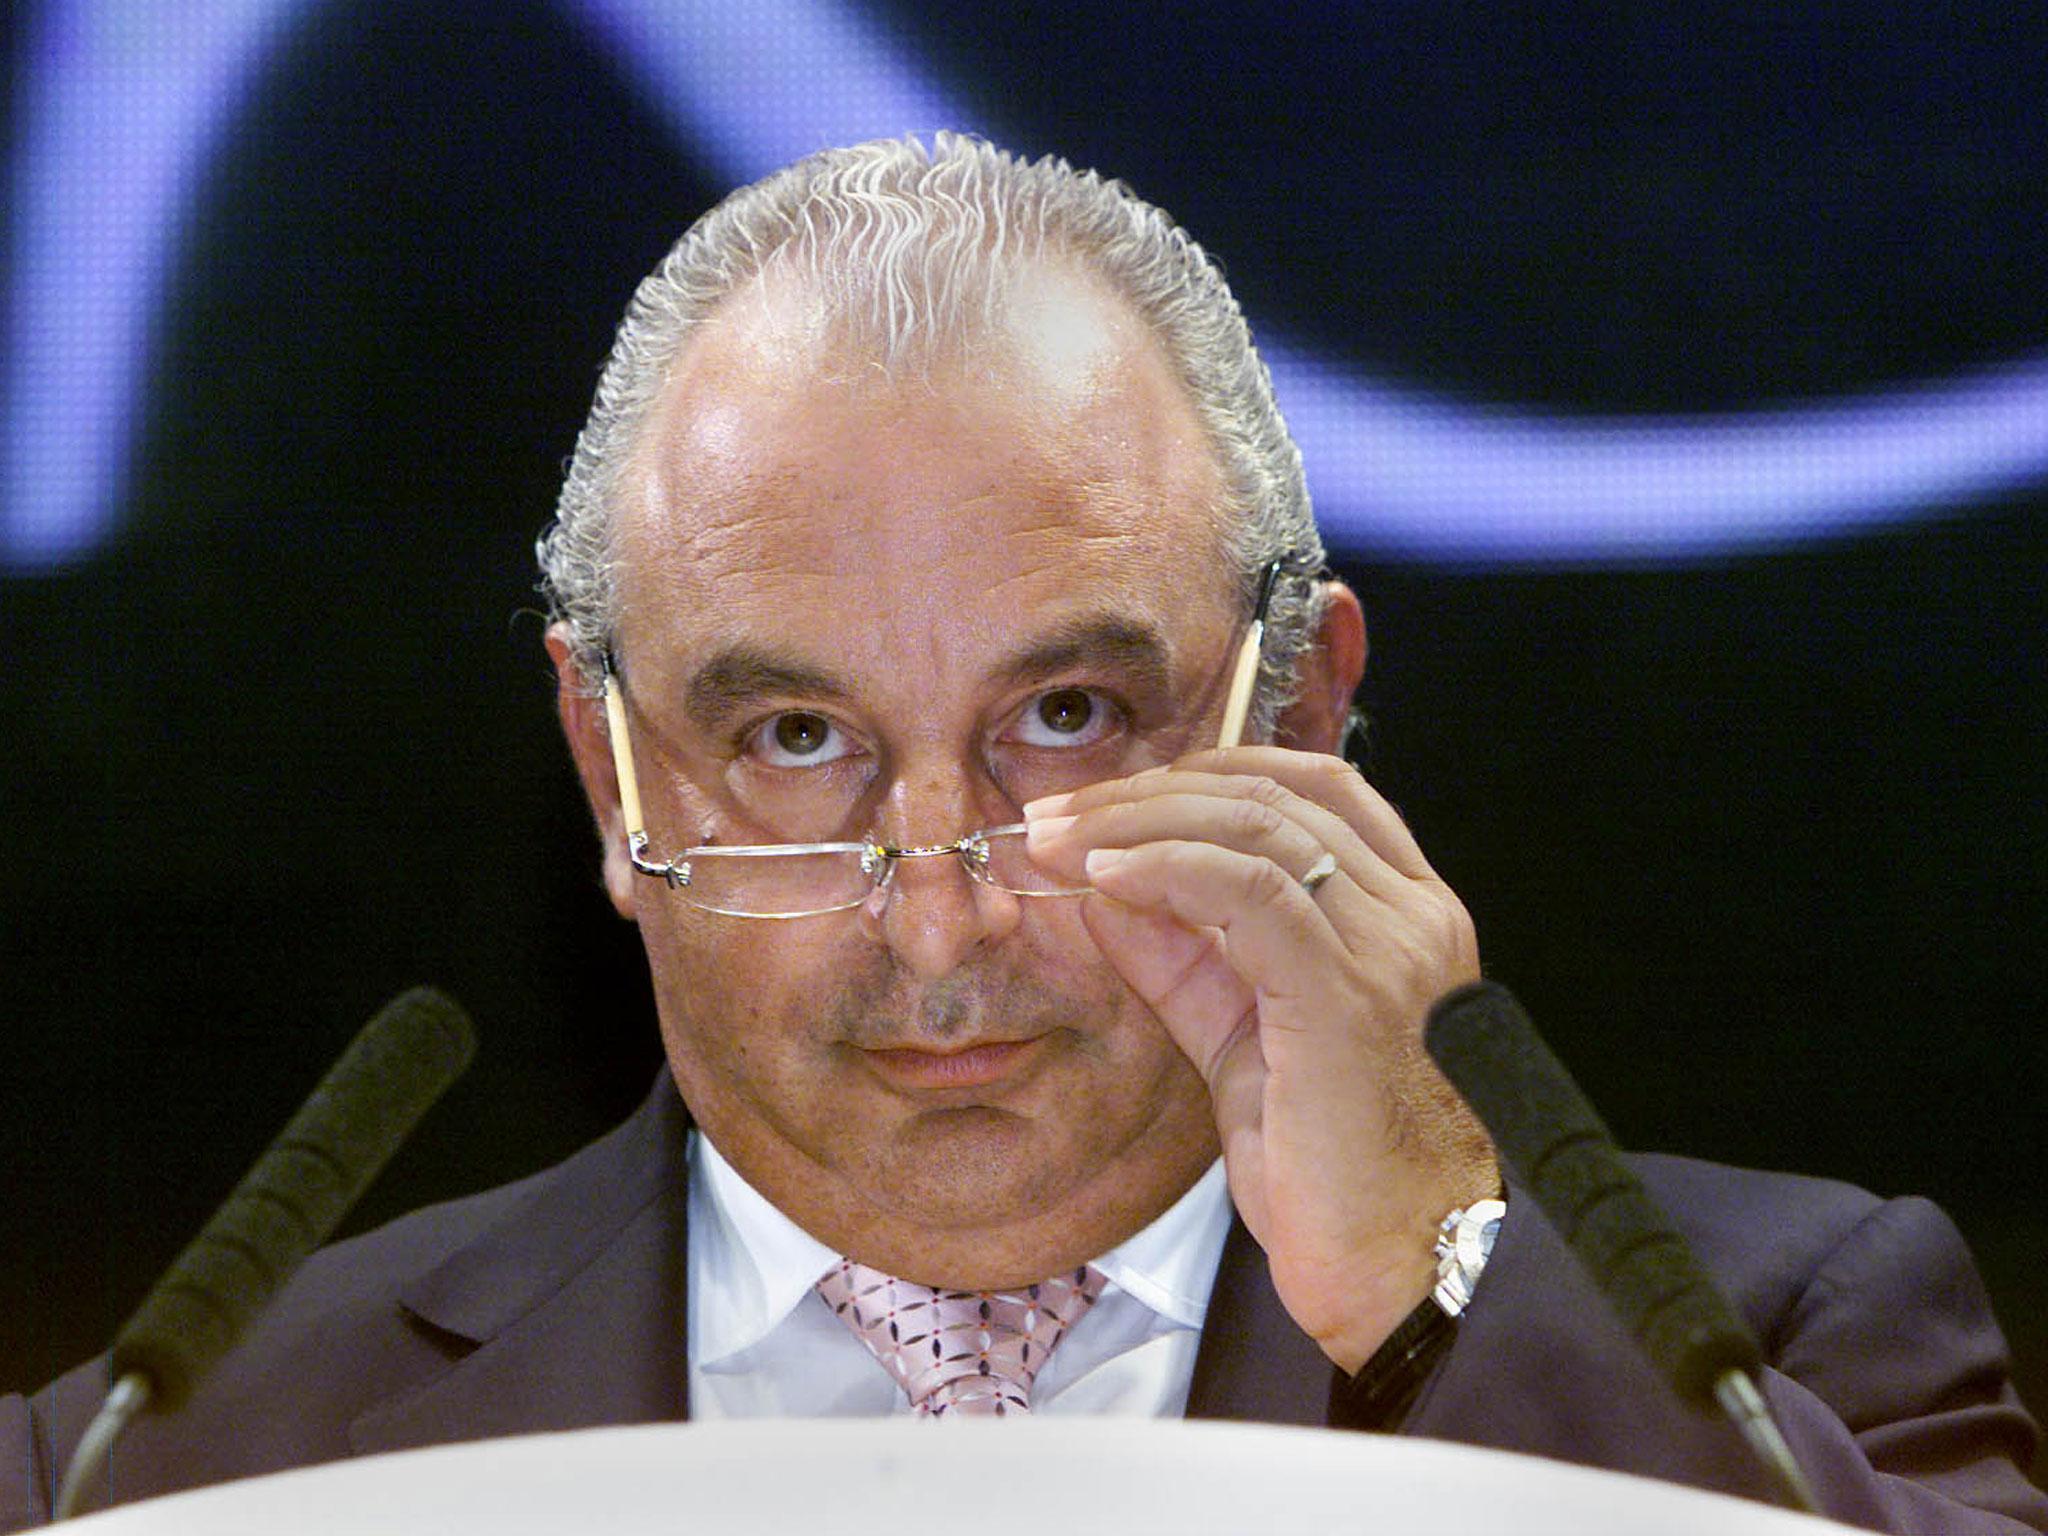 The Prime Minister has hit out at company bosses who ‘game the system’ amid outcry at the behaviour of Sir Philip Green over the collapse of BHS